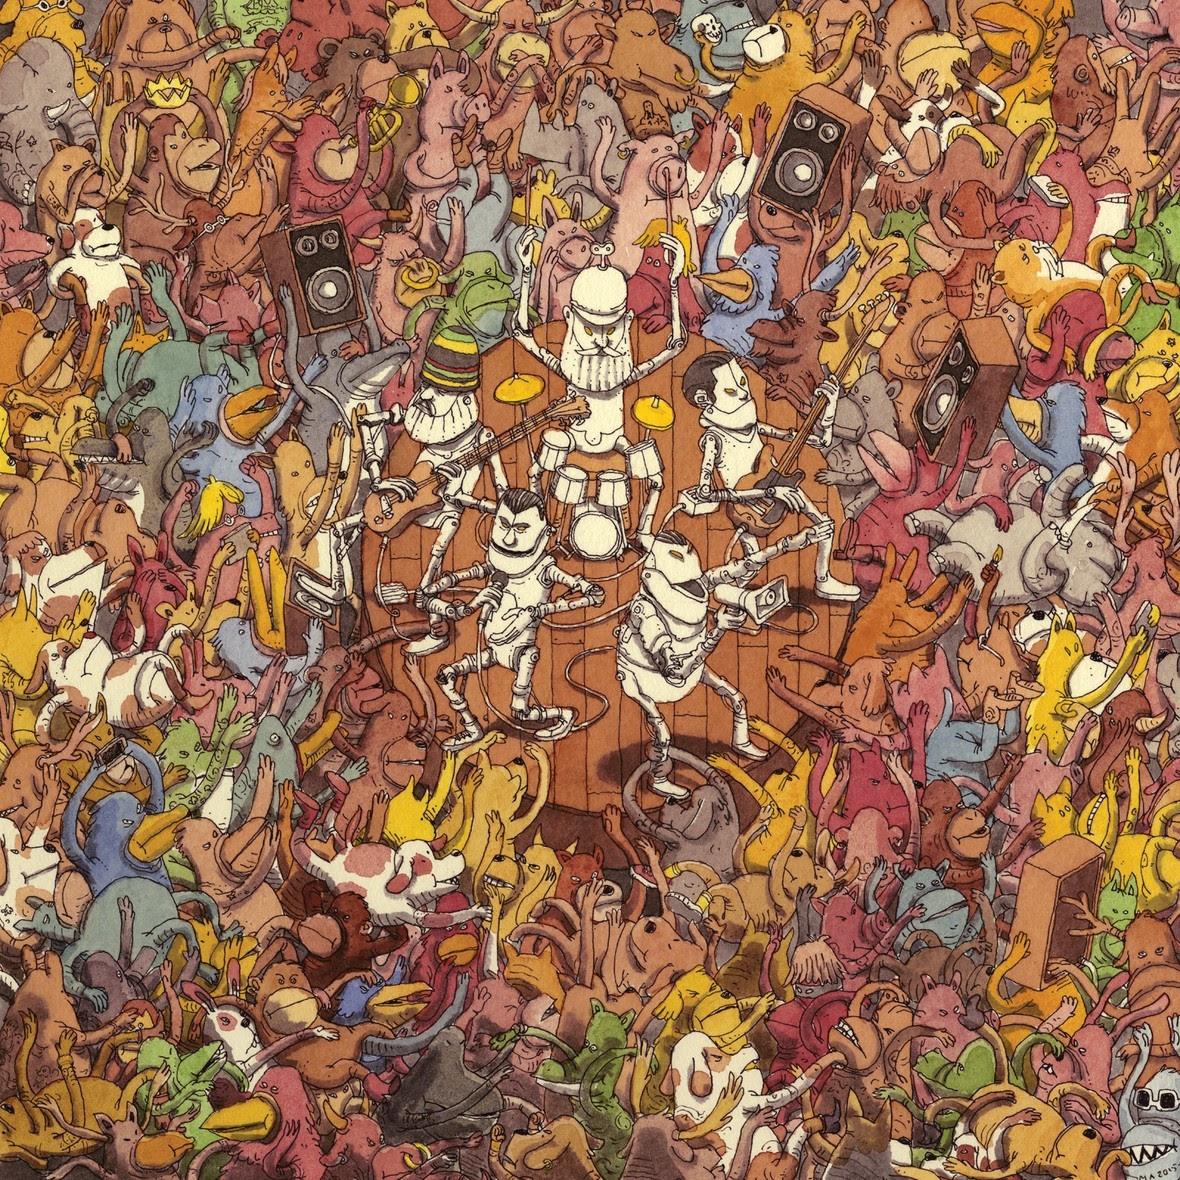 Dance Gavin Dance Releasing 'Tree City Sessions'- A Collection of 12